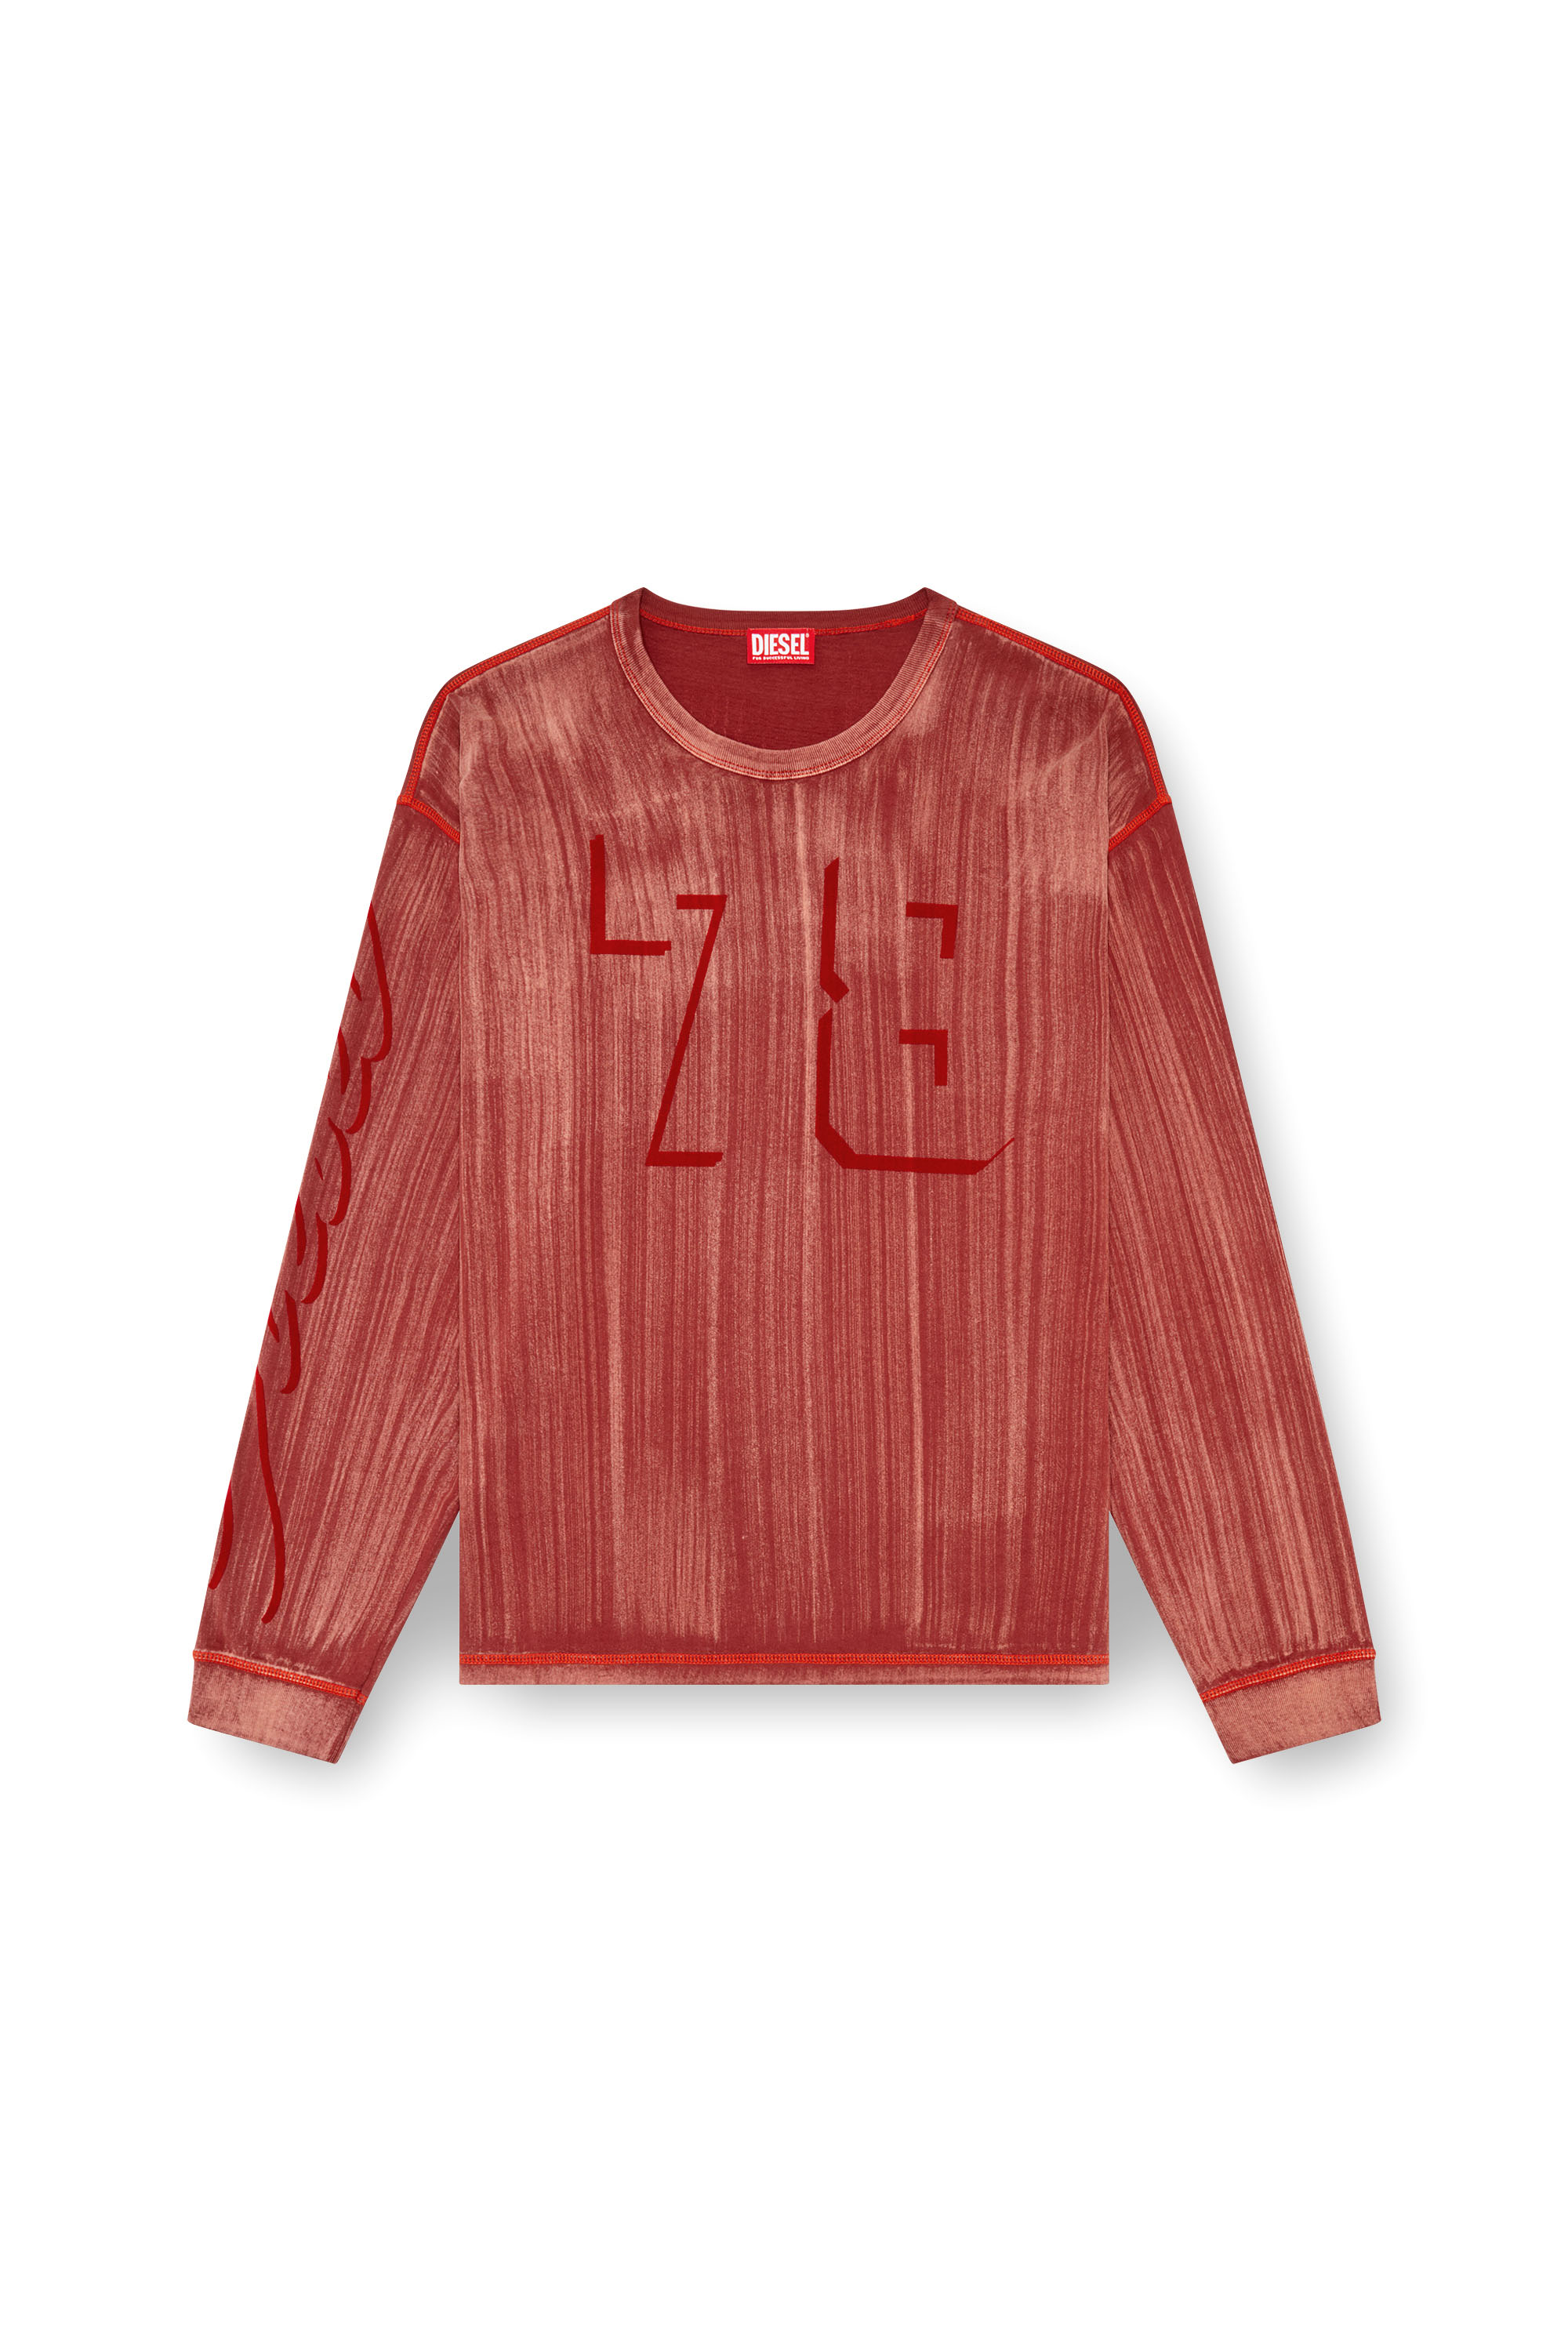 Diesel - T-BOXT-LS-Q2, Uomo T-shirt a maniche lunghe con pennellate in Rosso - Image 4